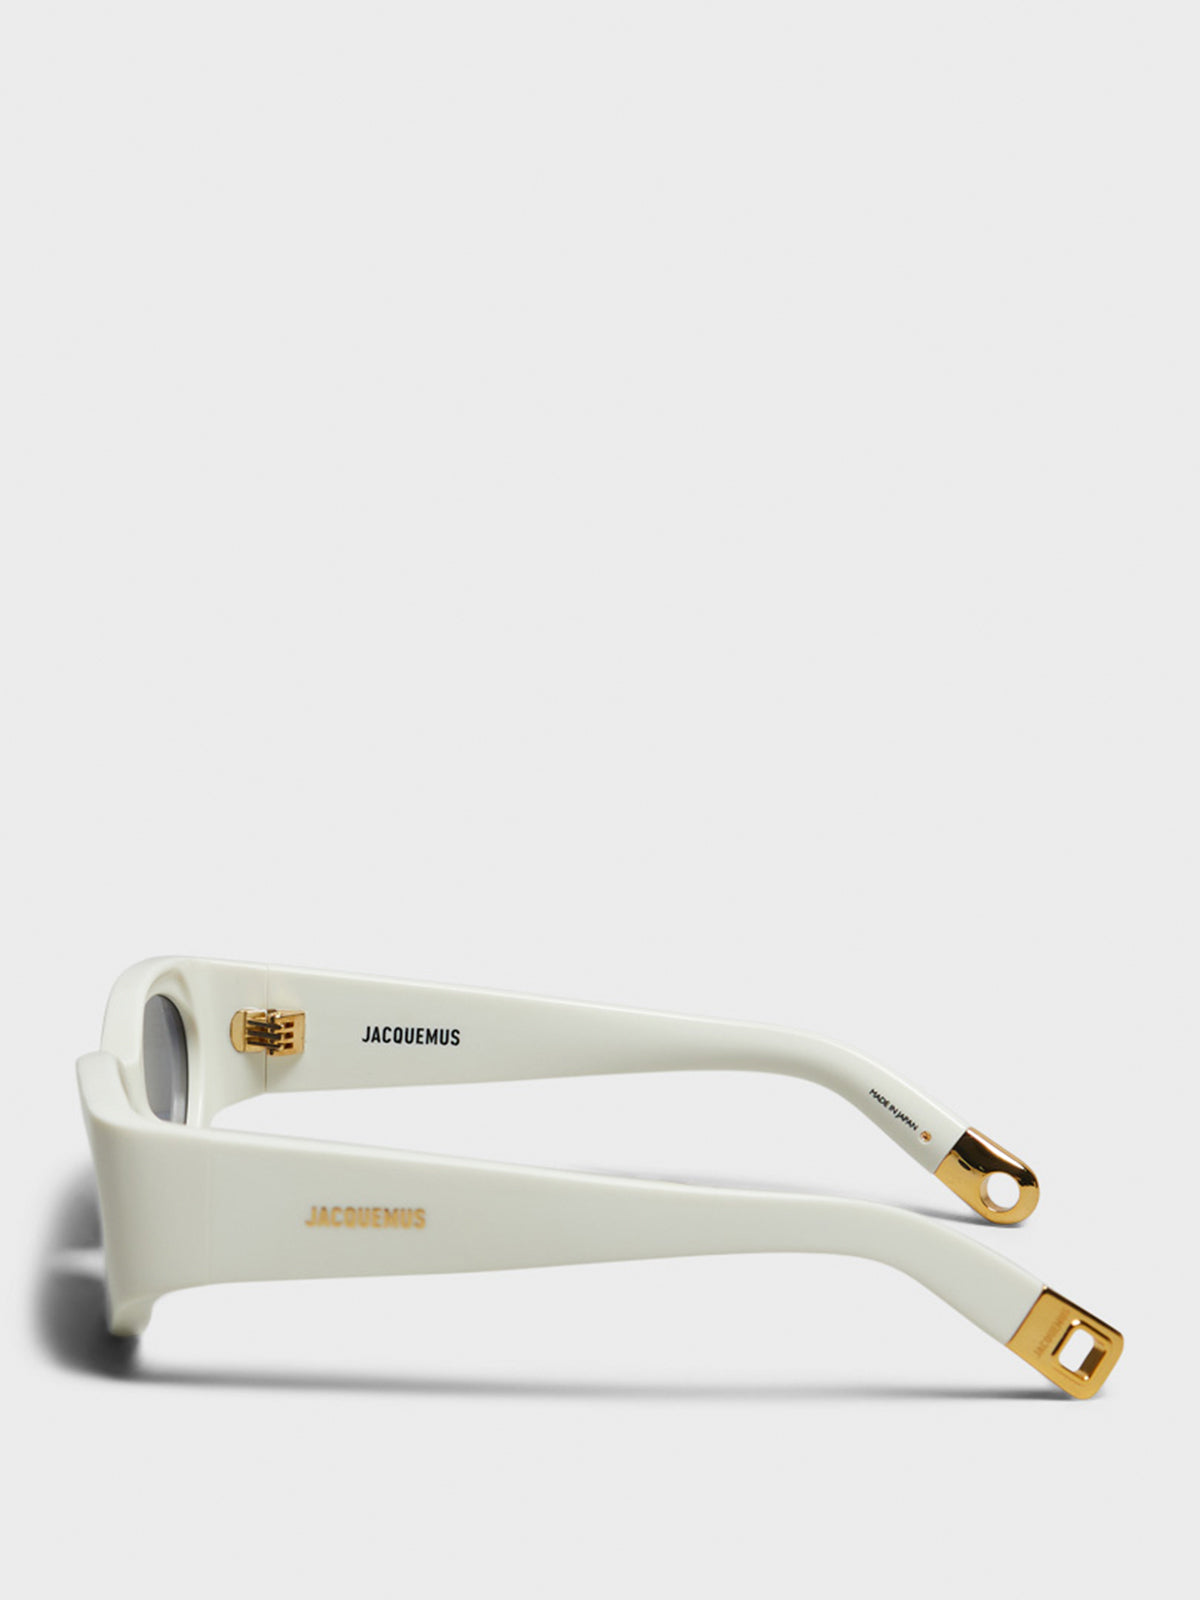 Ovalo Sunglasses in White, Yellow Gold and Navy